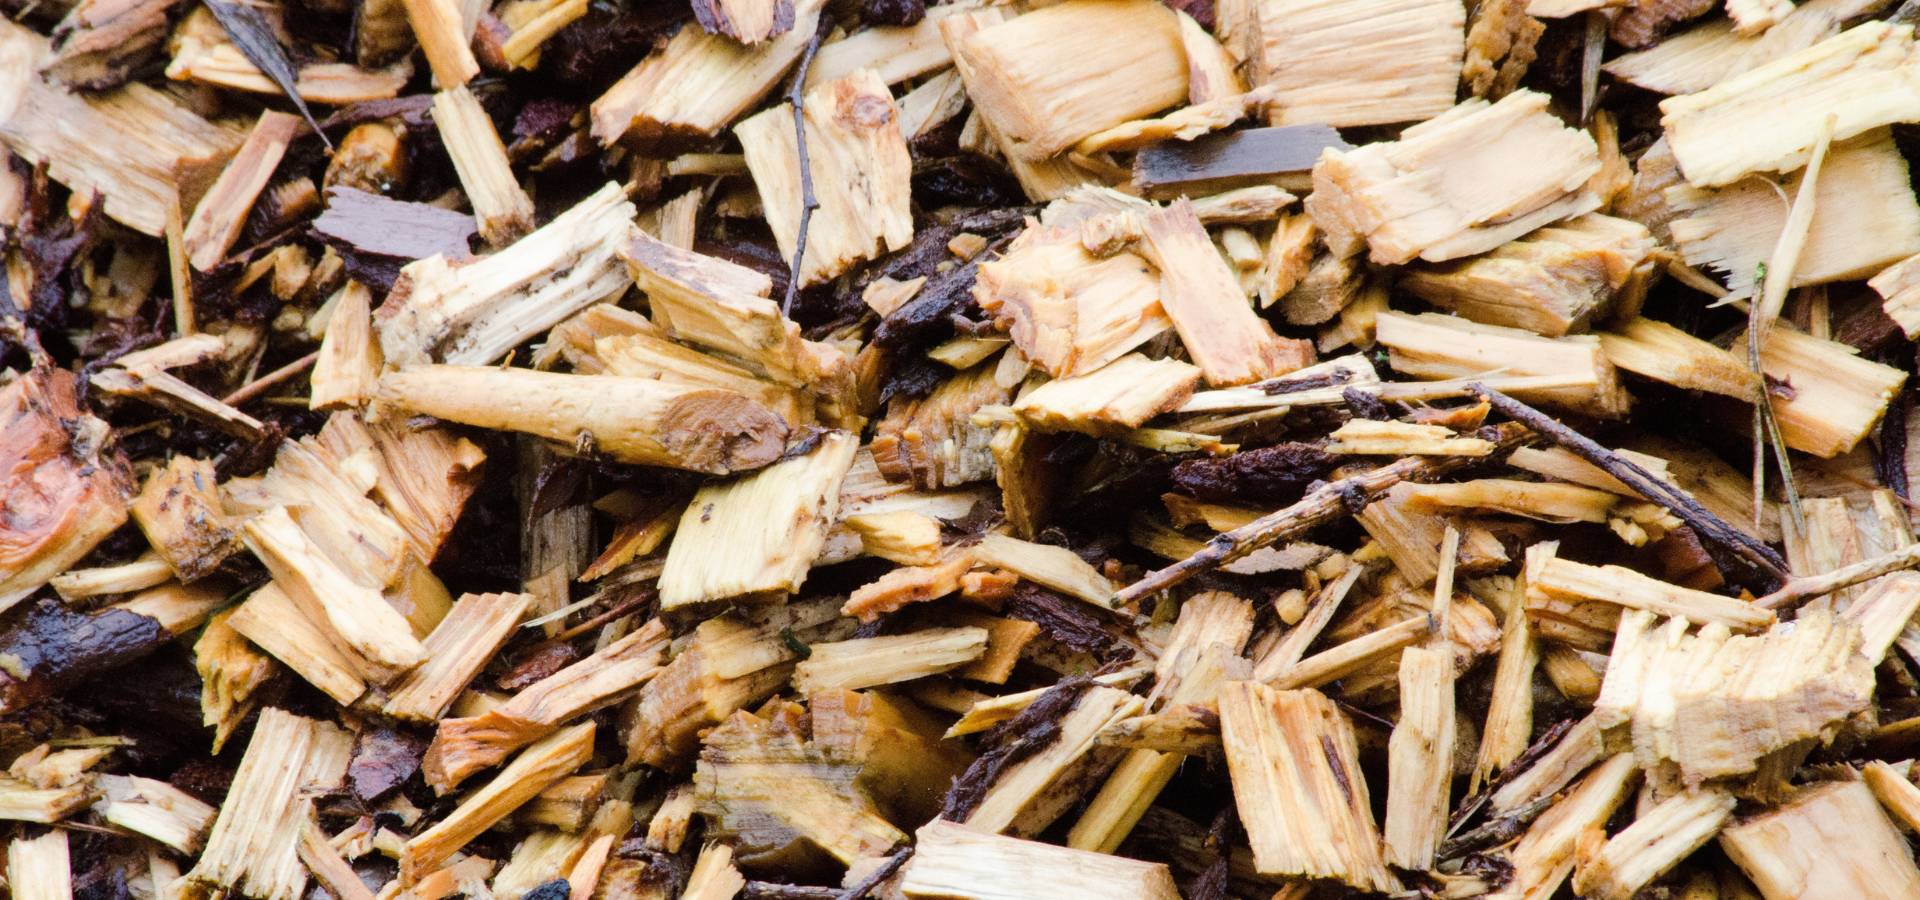 Moist brown and tan woodchips of various sizes with small twigs. There are numerous uses for woodchips like these.